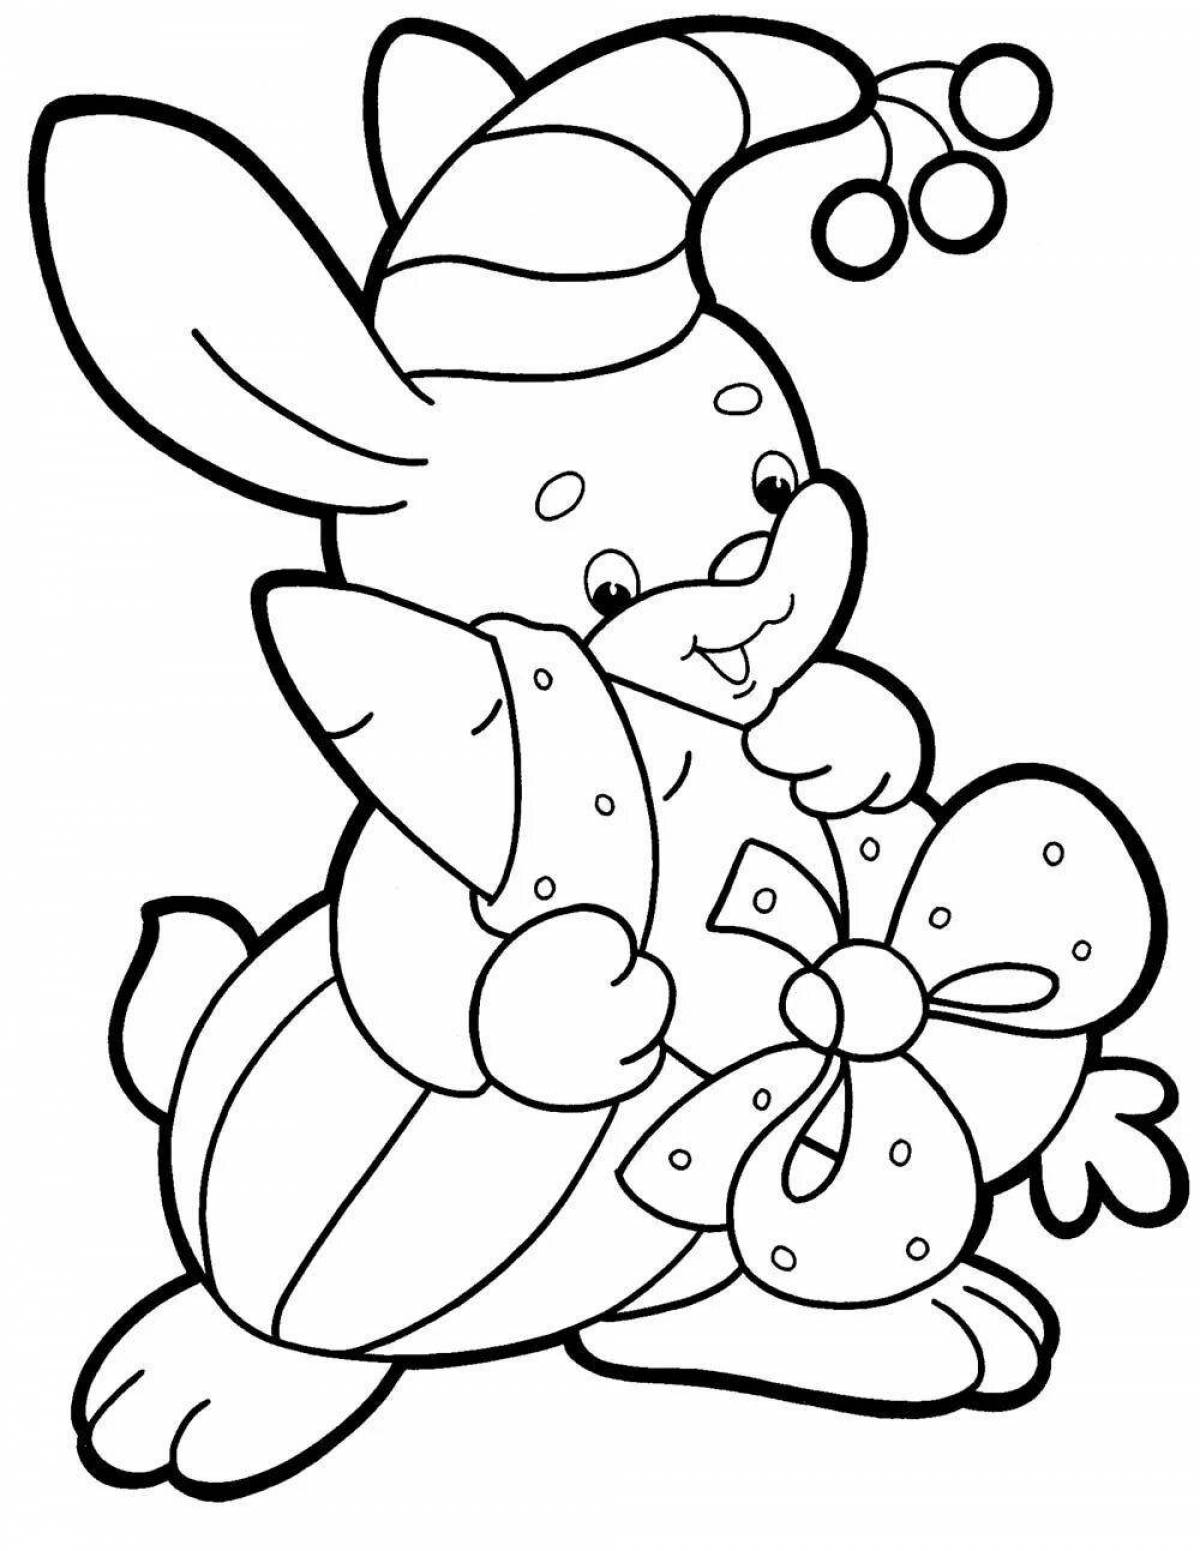 Gorgeous bunny Christmas coloring book